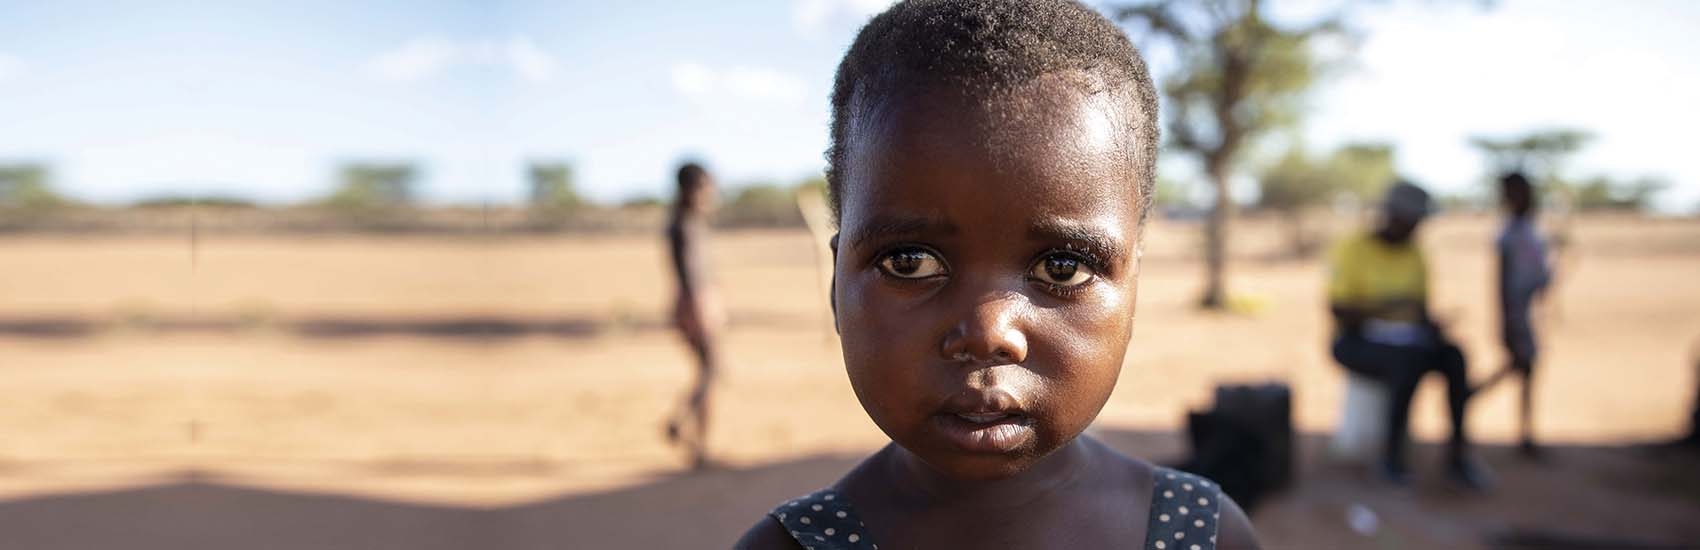 In Zimbabwe, a young girl stand in front of a dry landscape.